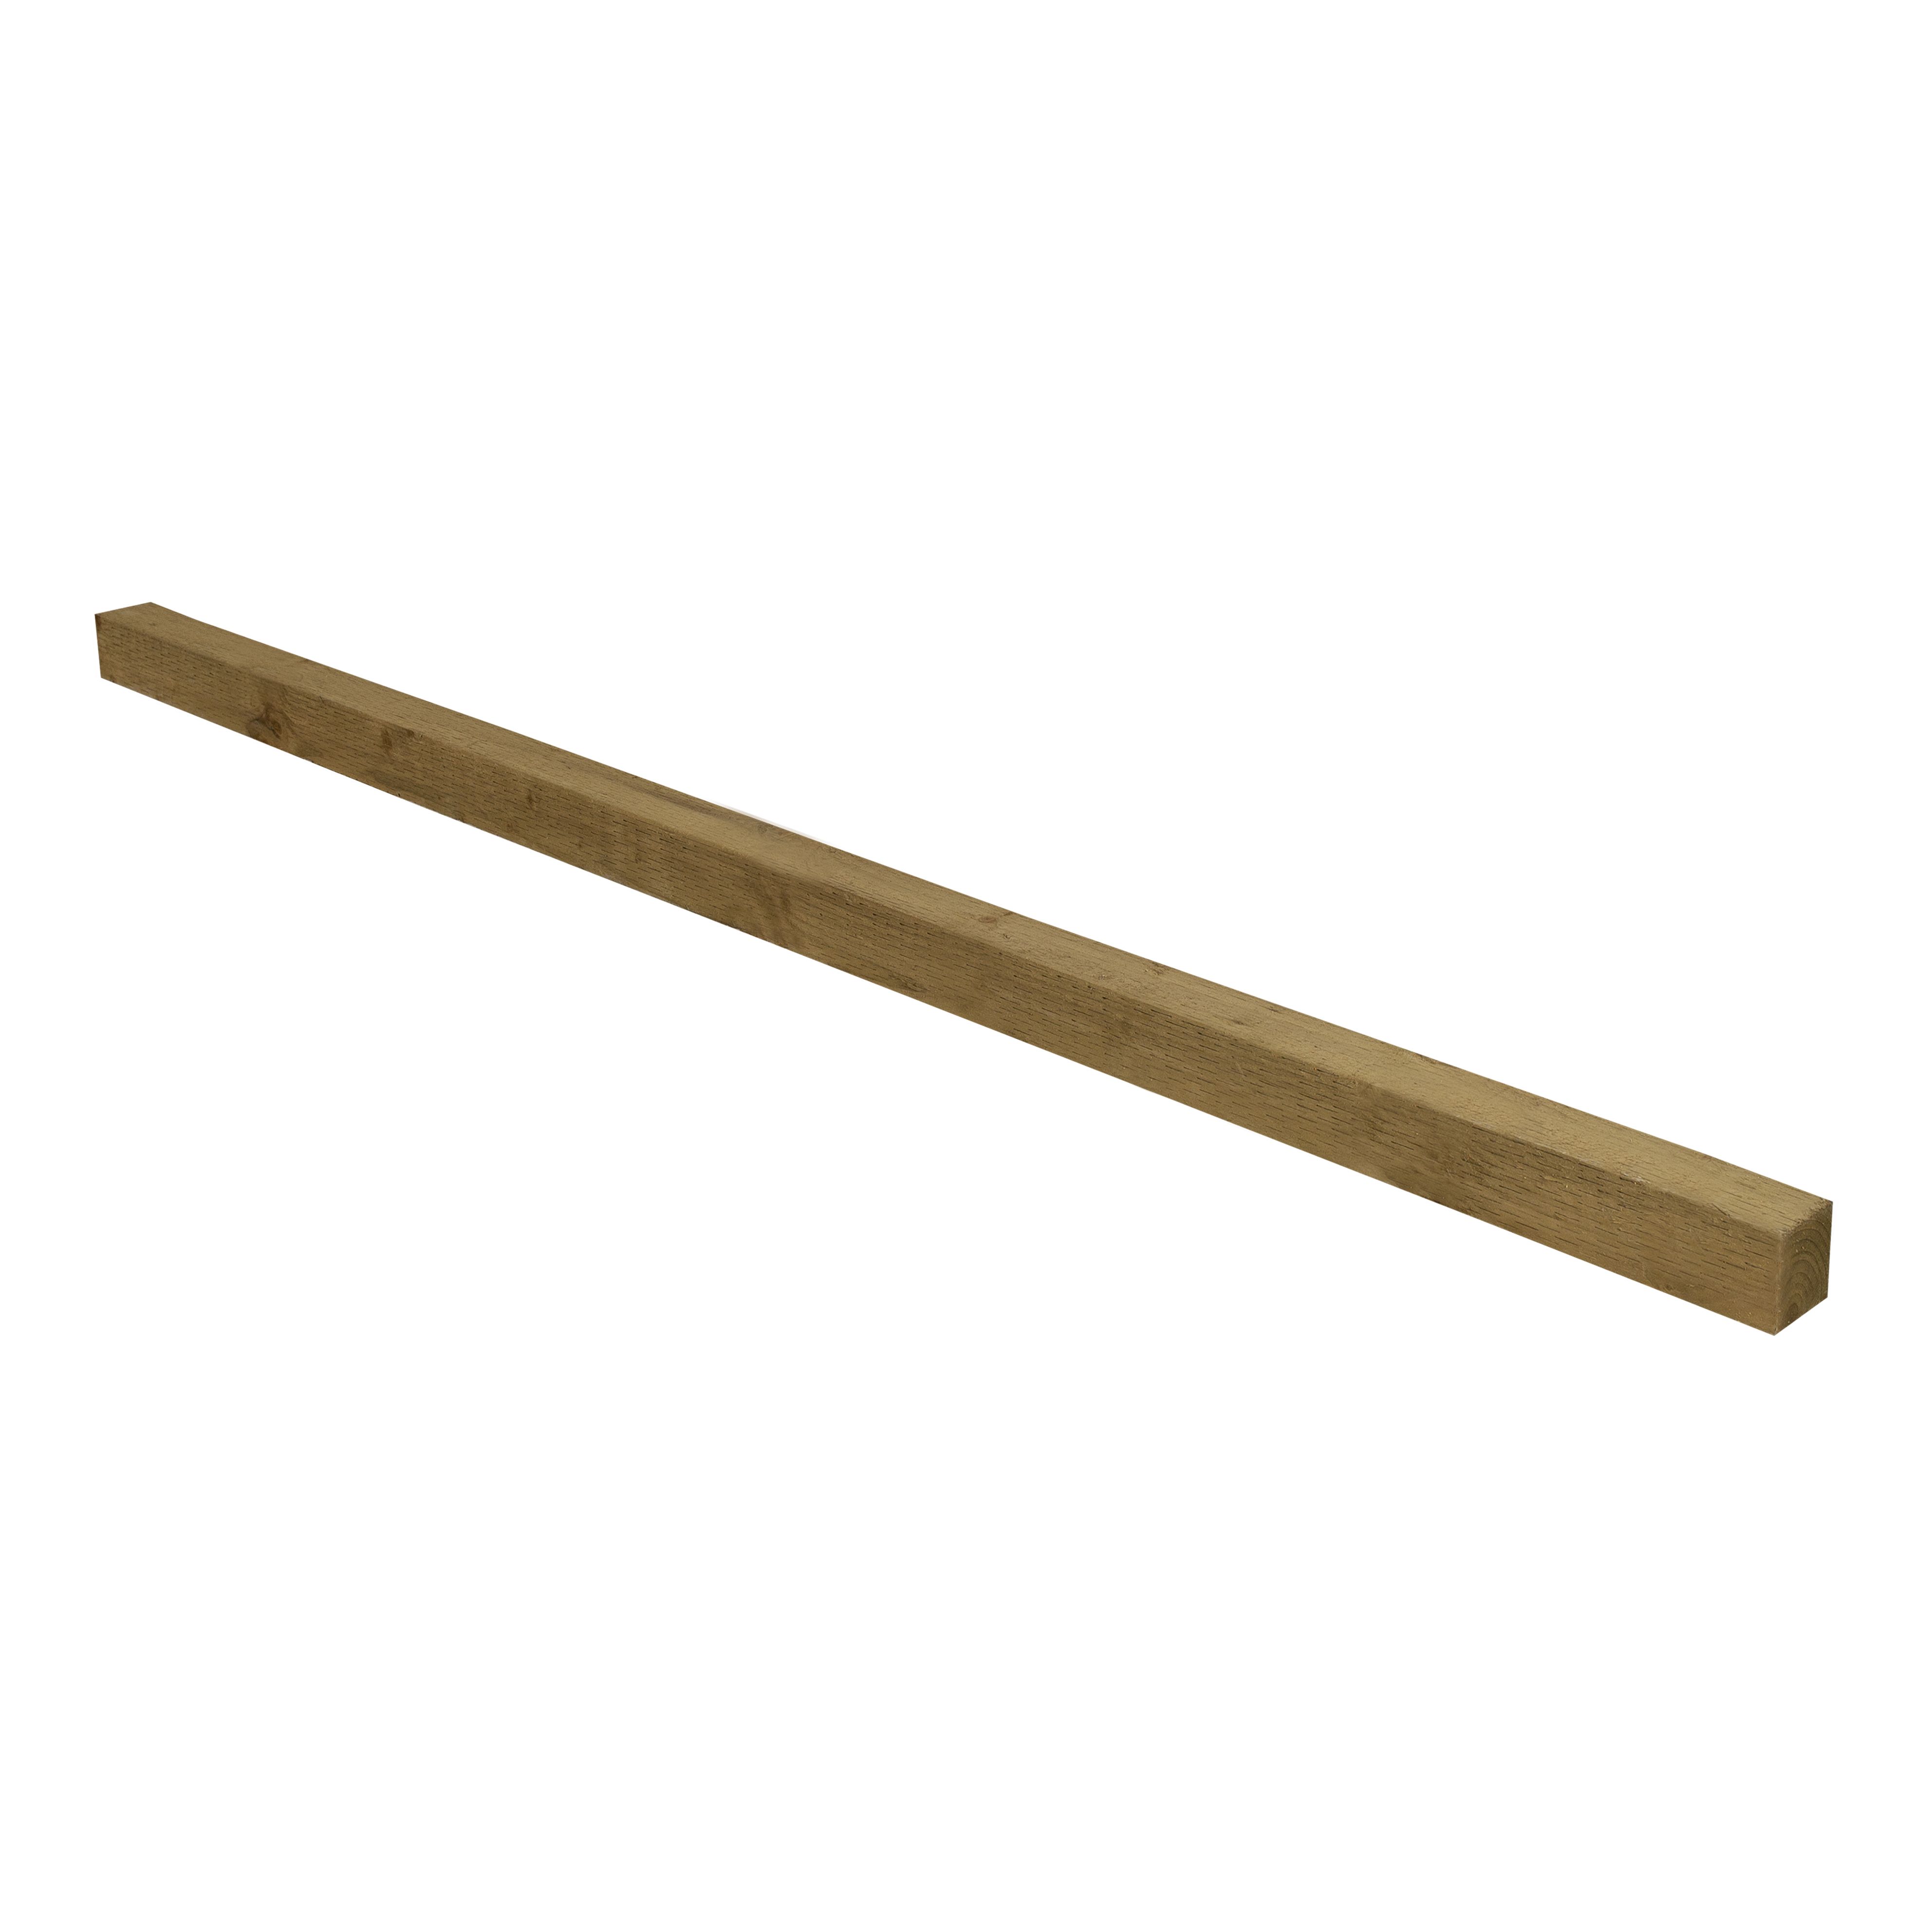 UC4 Green Square Wooden Fence post (H)2.1m (W)75mm, Pack of 5